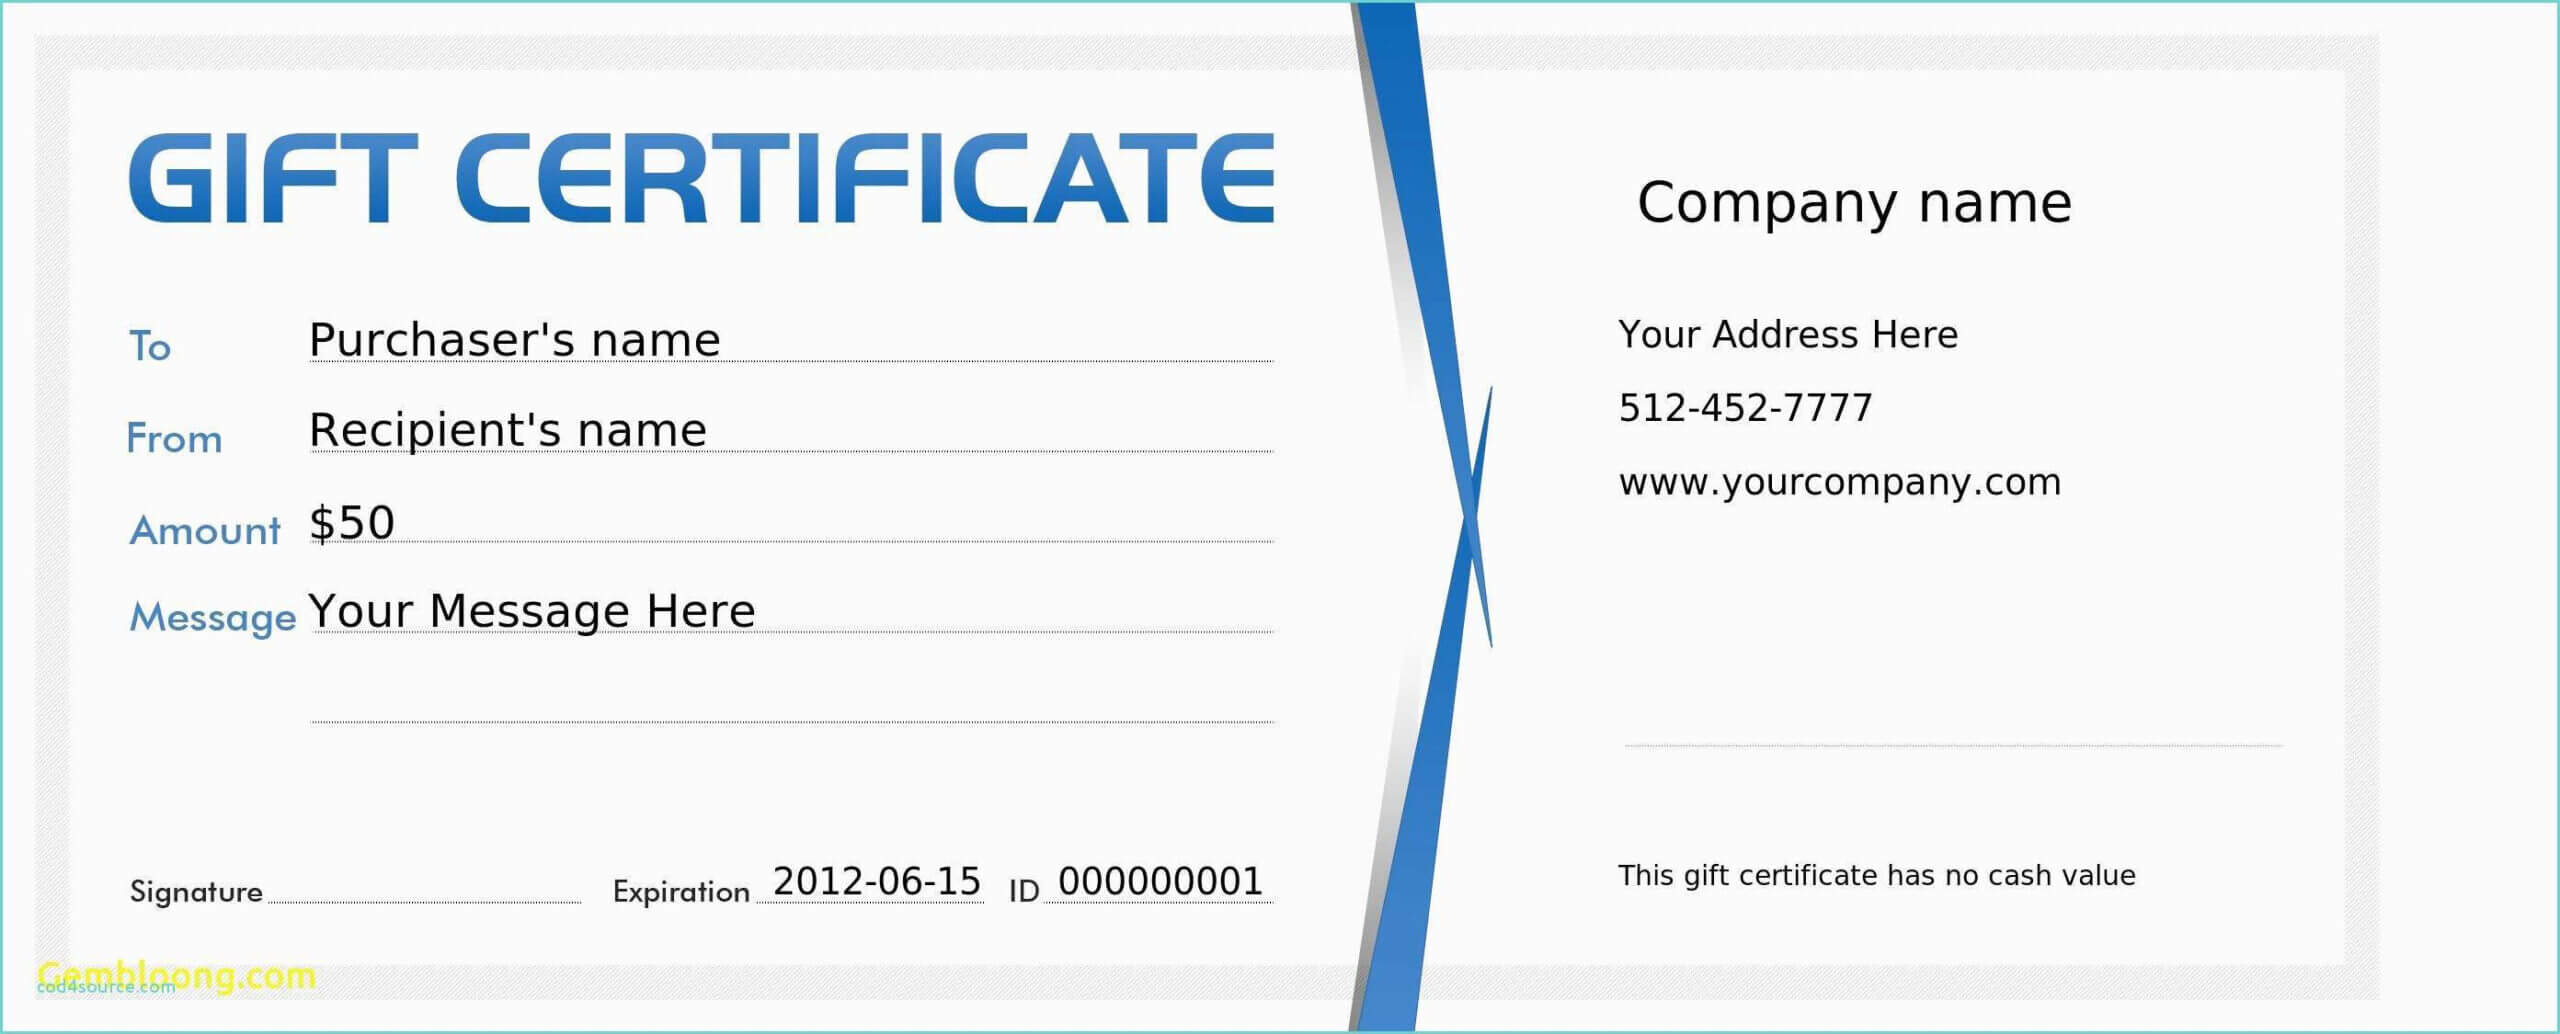 Gift Certificate Template Microsoft Publisher With Publisher Gift Certificate Template